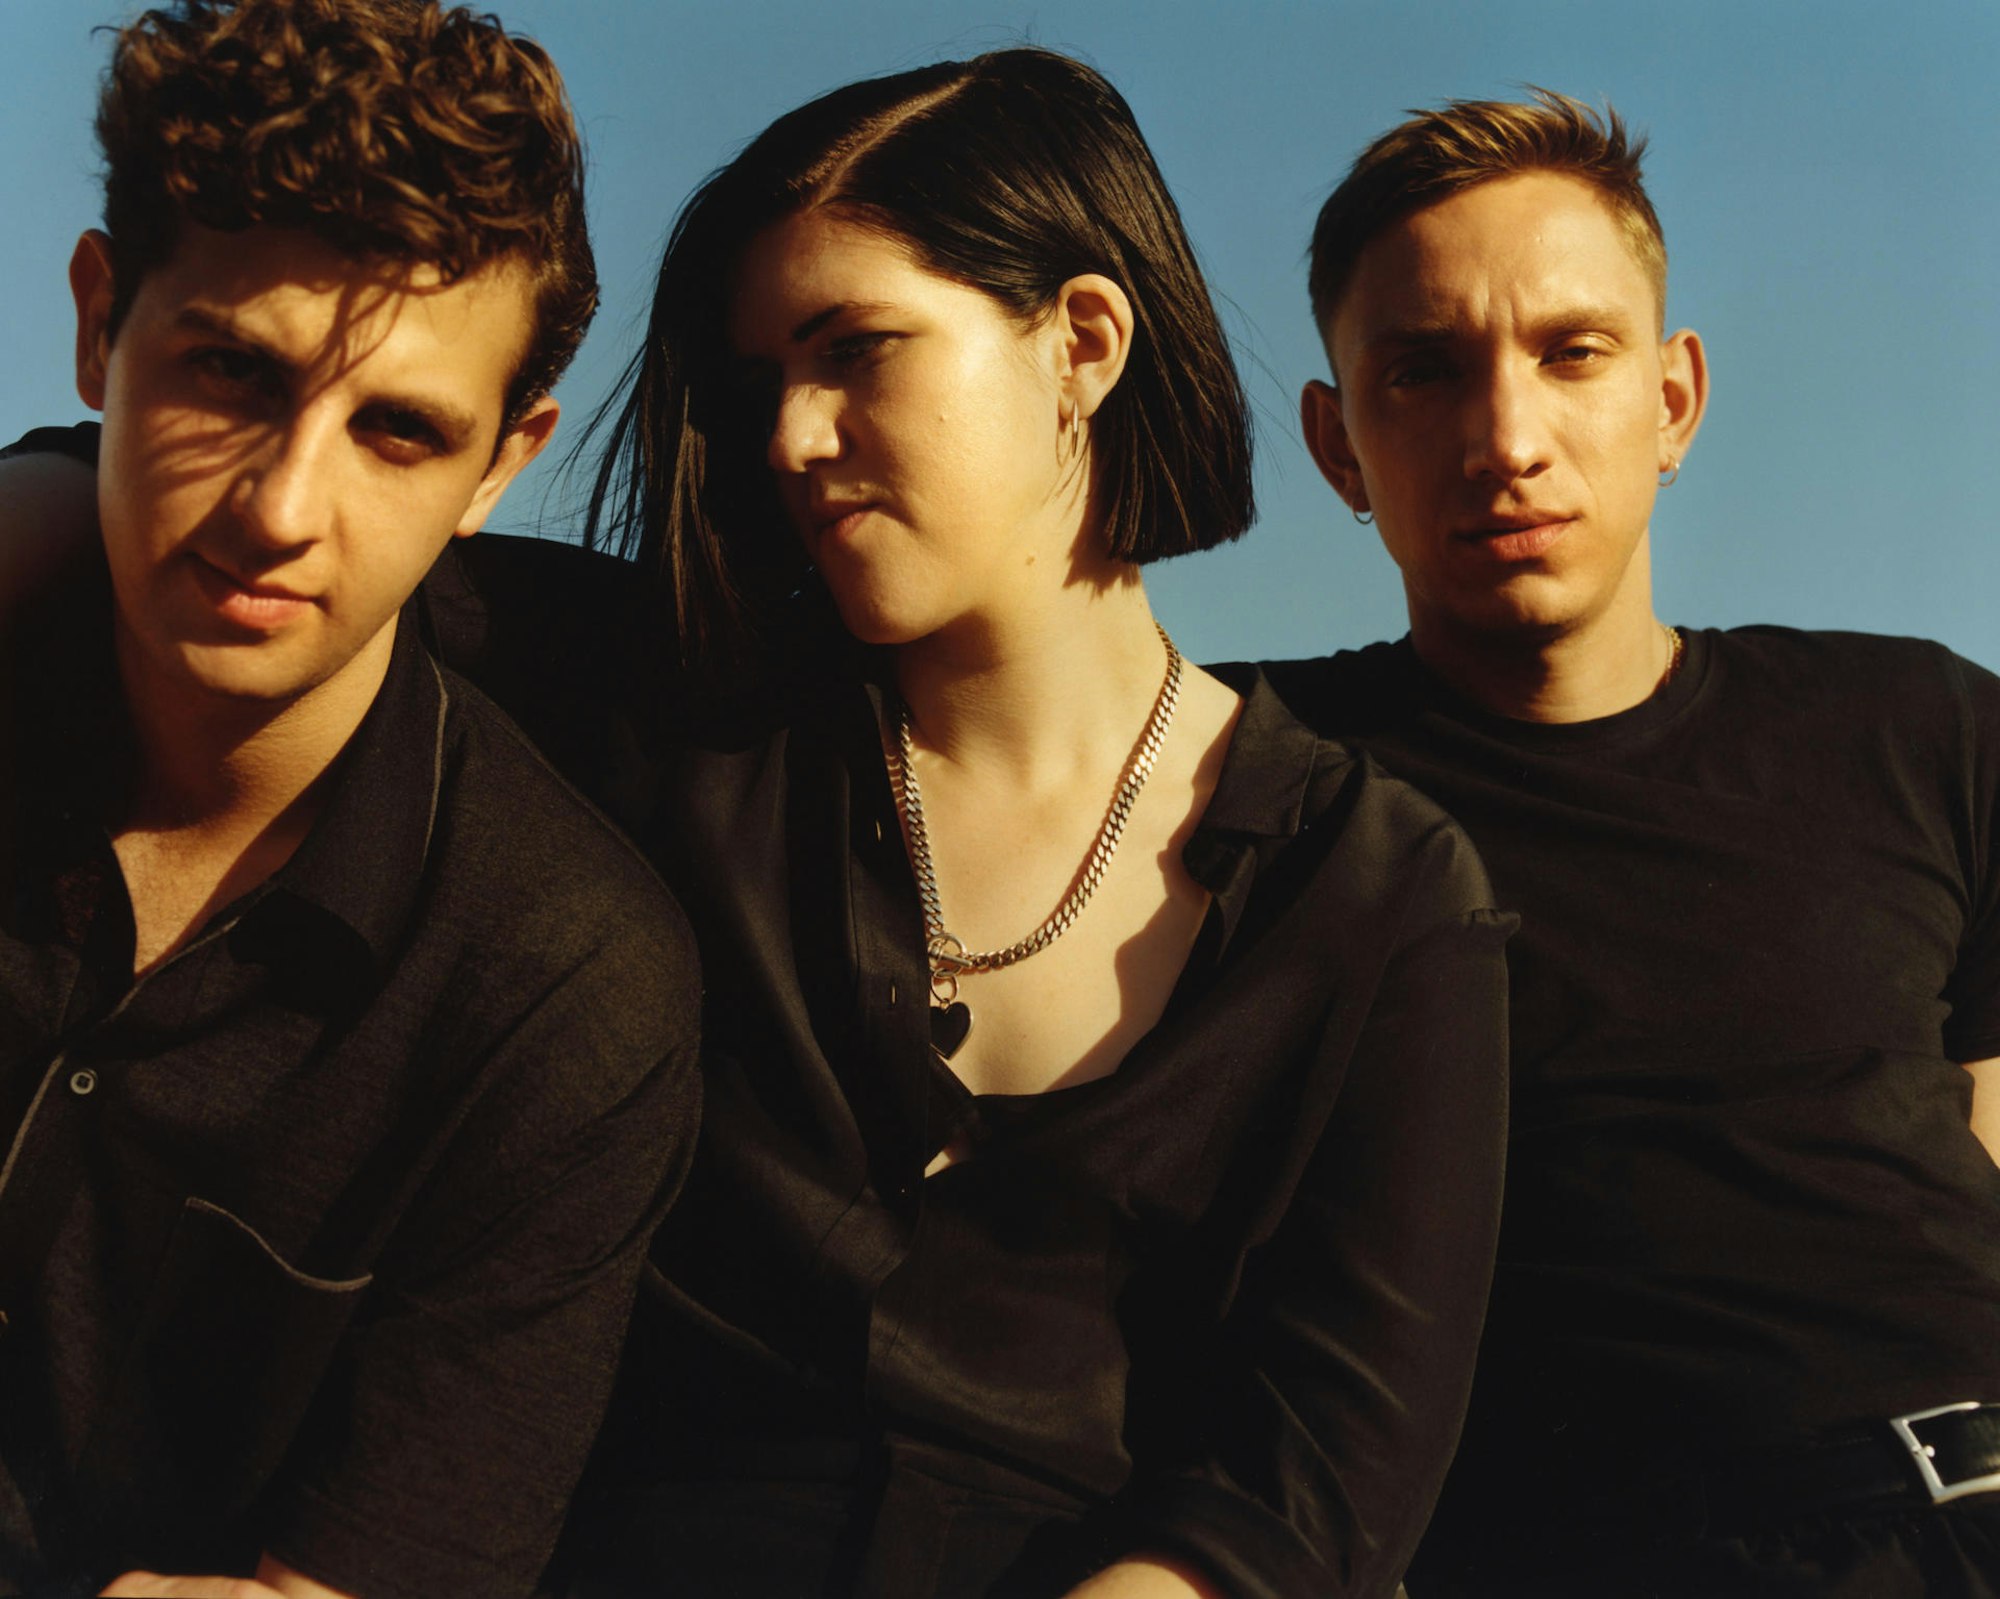 RS63846_The xx Press Photo 1 (cred Laura Coulson)